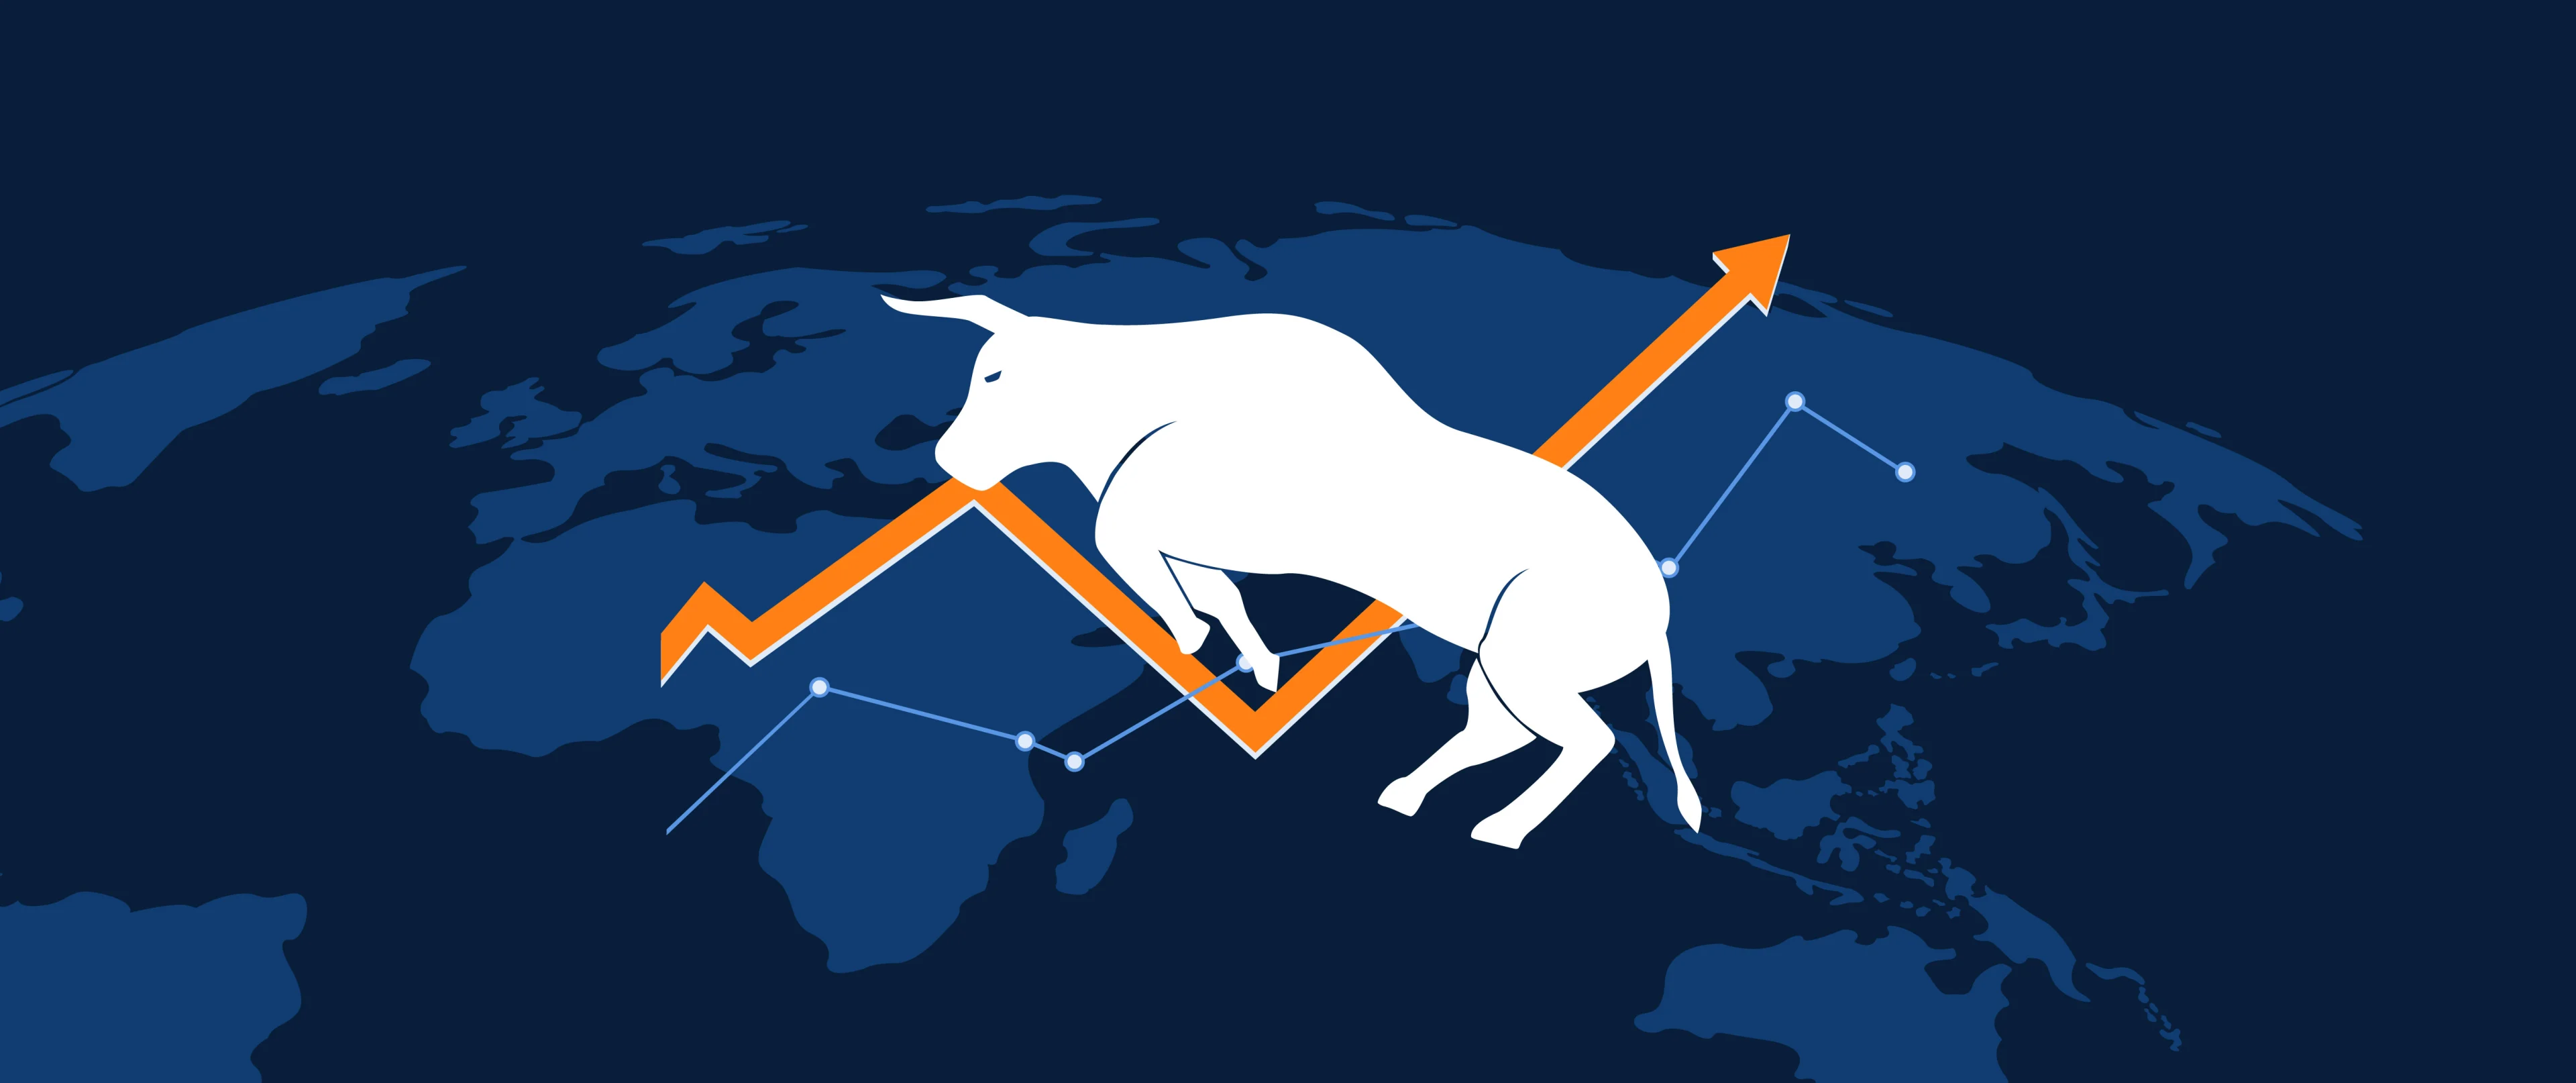 Could the East trigger the next bull market run?